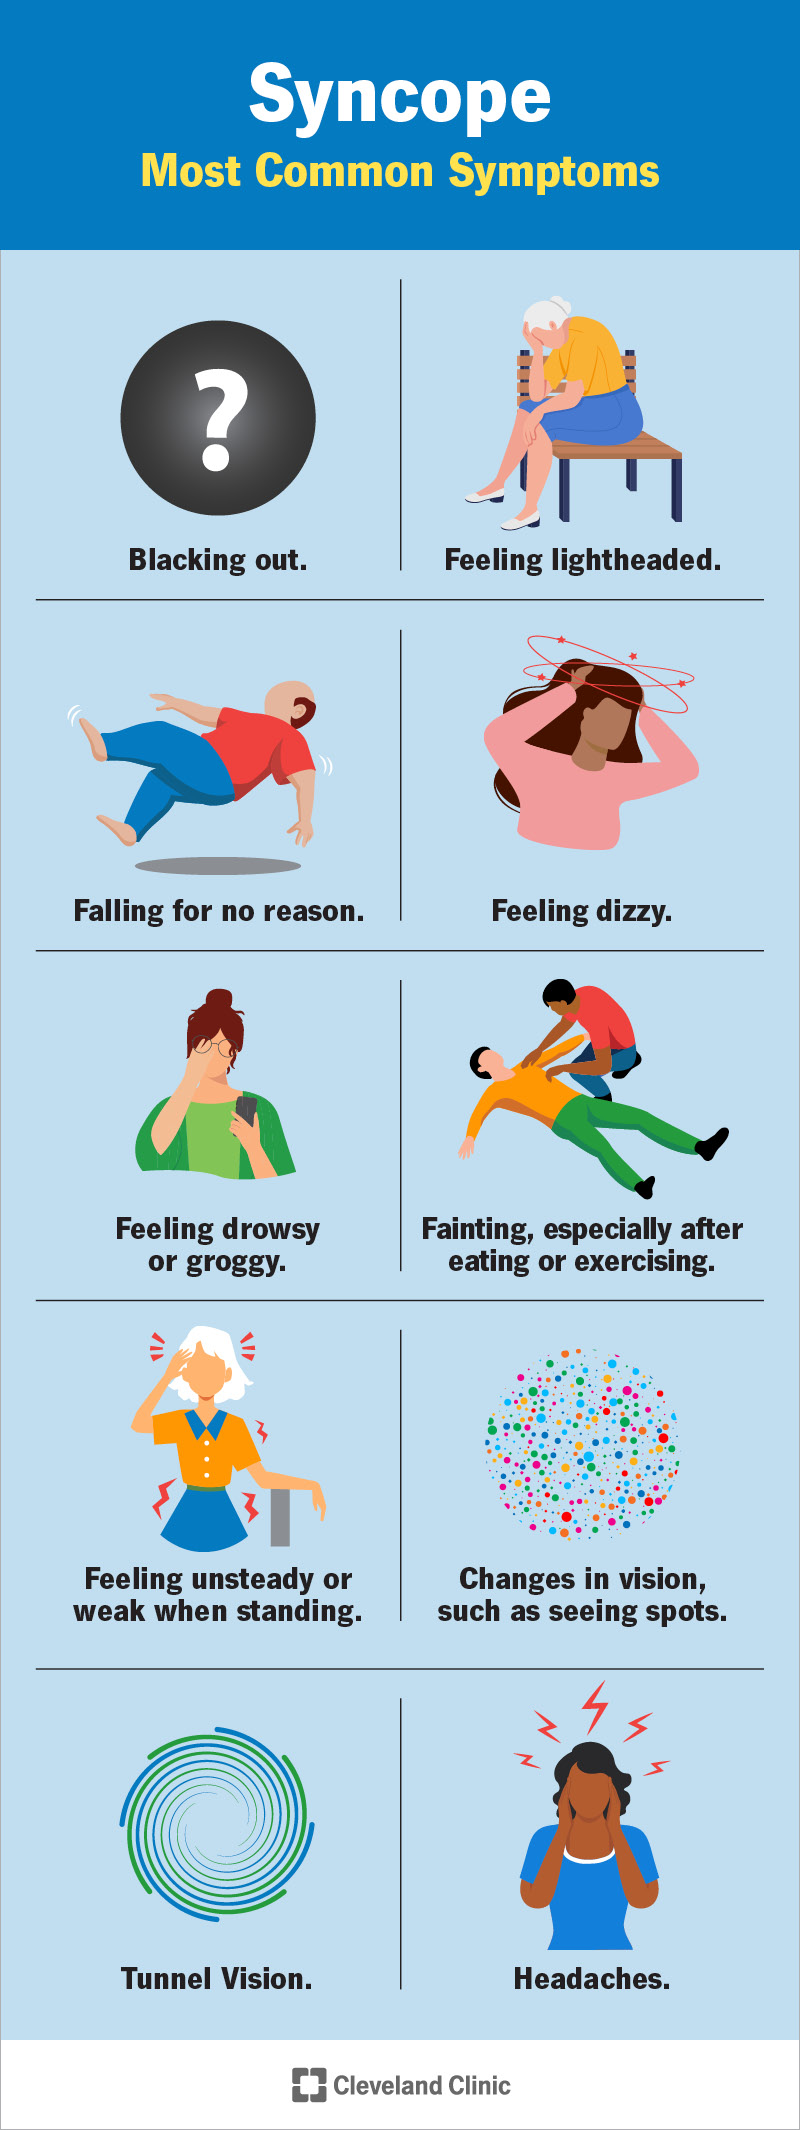 Common symptoms of syncope include feeling dizzy and unsteady.